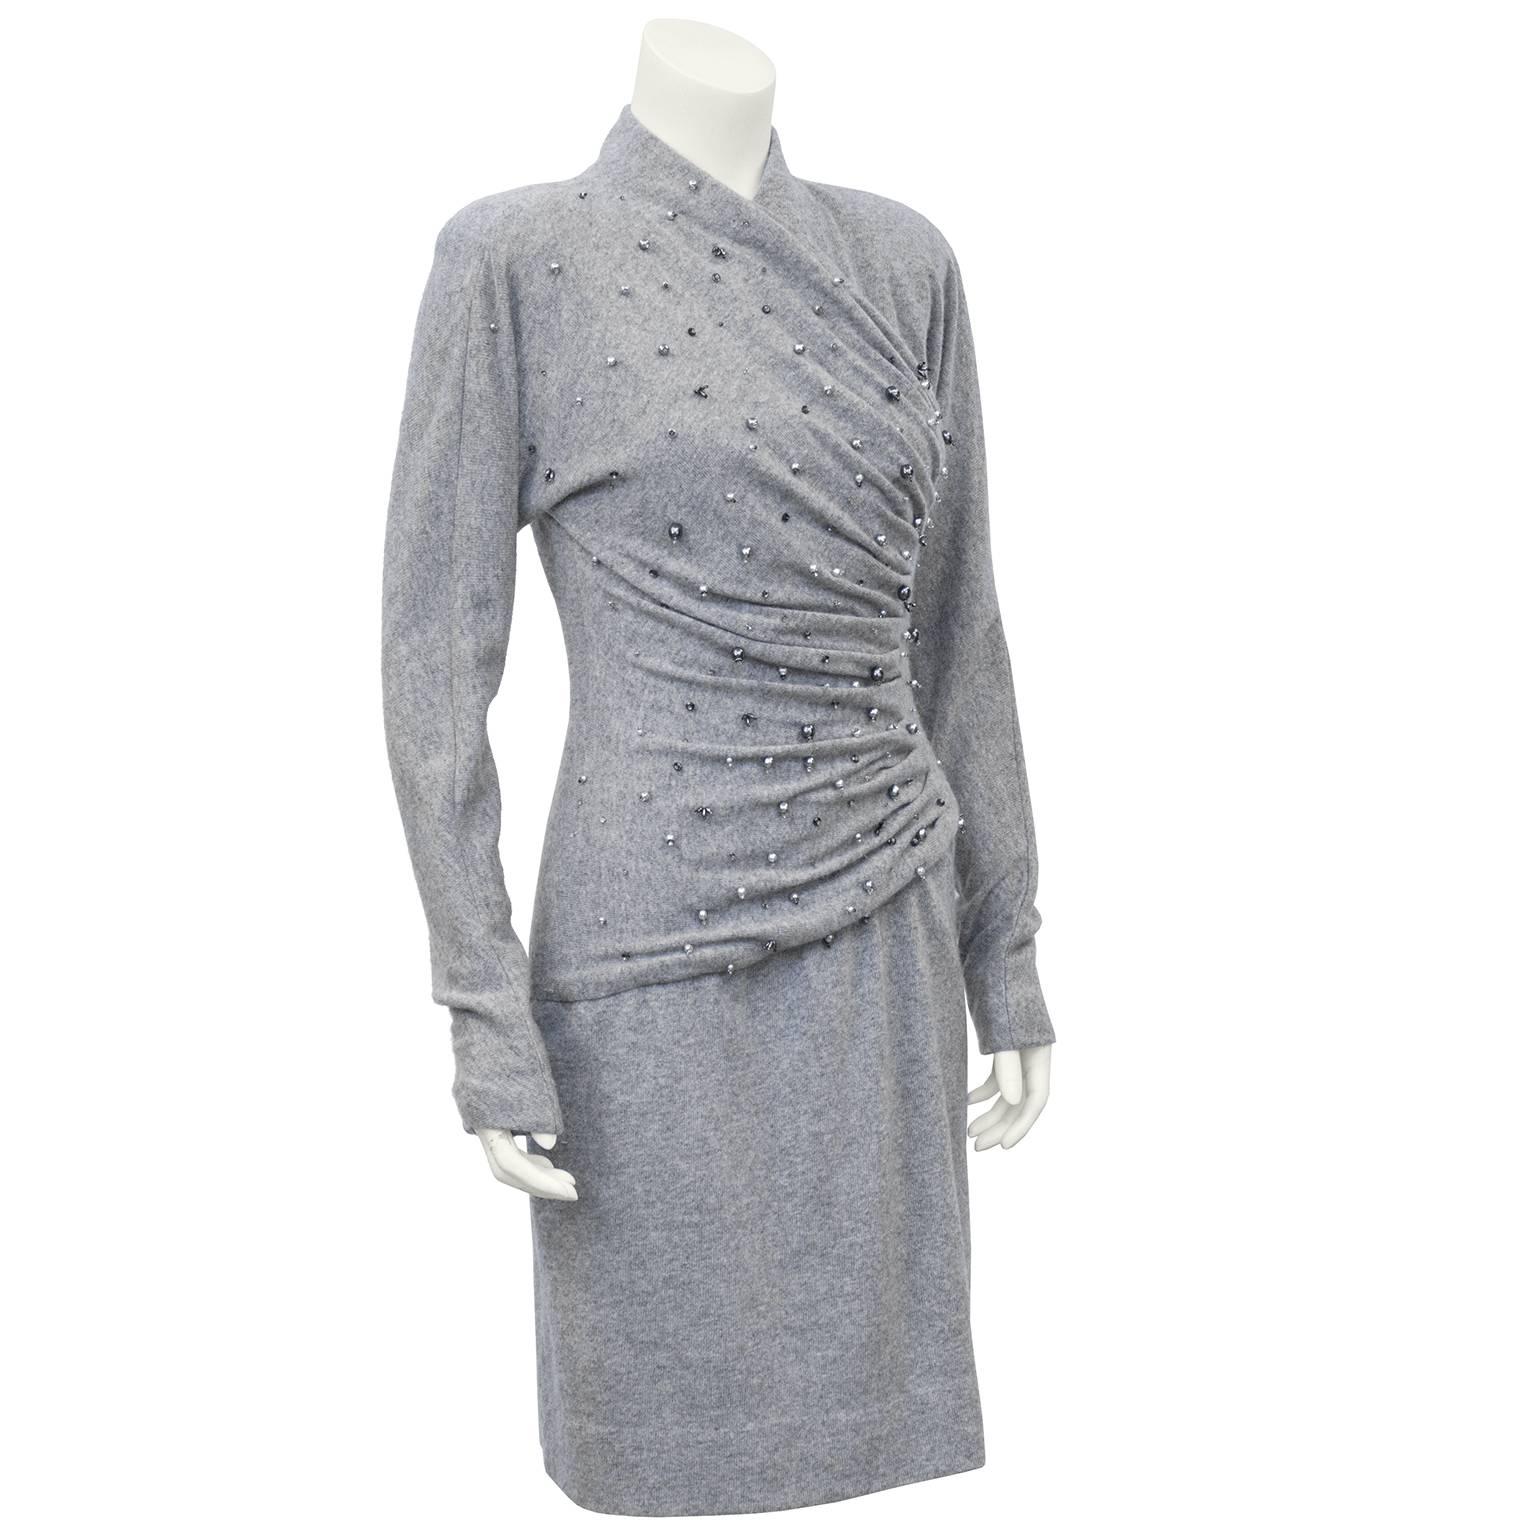 Cozy and sexy Carolyne Roehm grey cashmere dress with figure flattering ruching. Dolman sleeves and greyish silver faux pearl beads throughout bodice, creating beautiful embellishment. Large shoulder pads that can be easily removed. Luxurious and